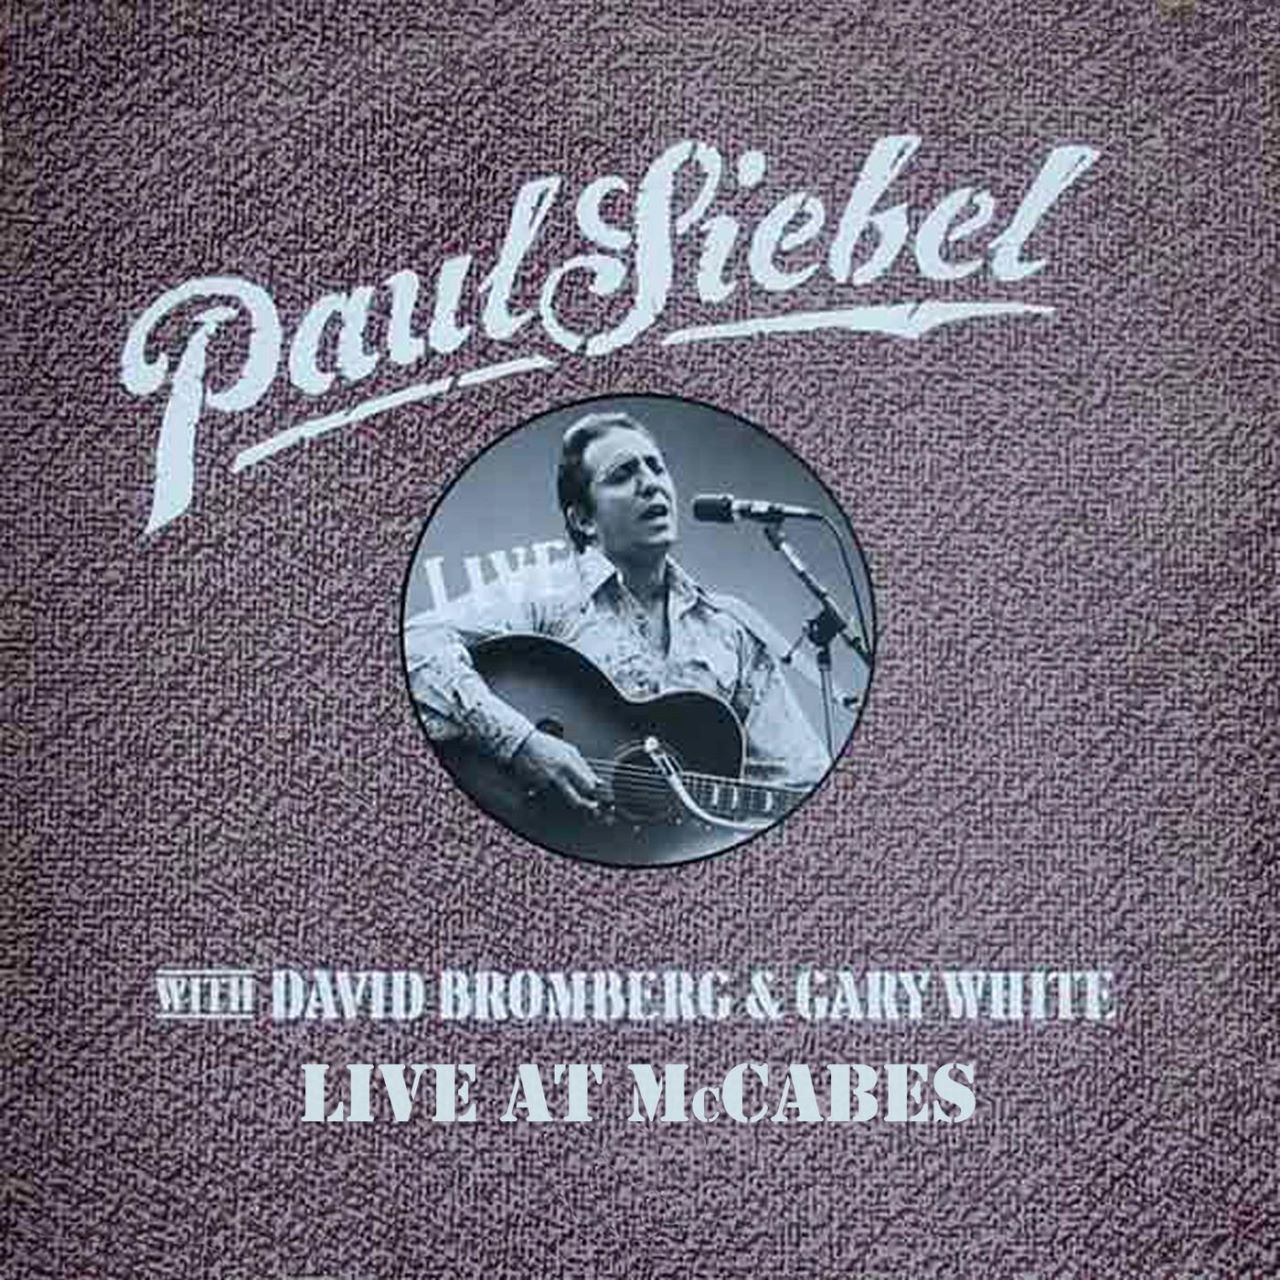 Paul Siebel - Live With David Bromberg And Gary White cover album